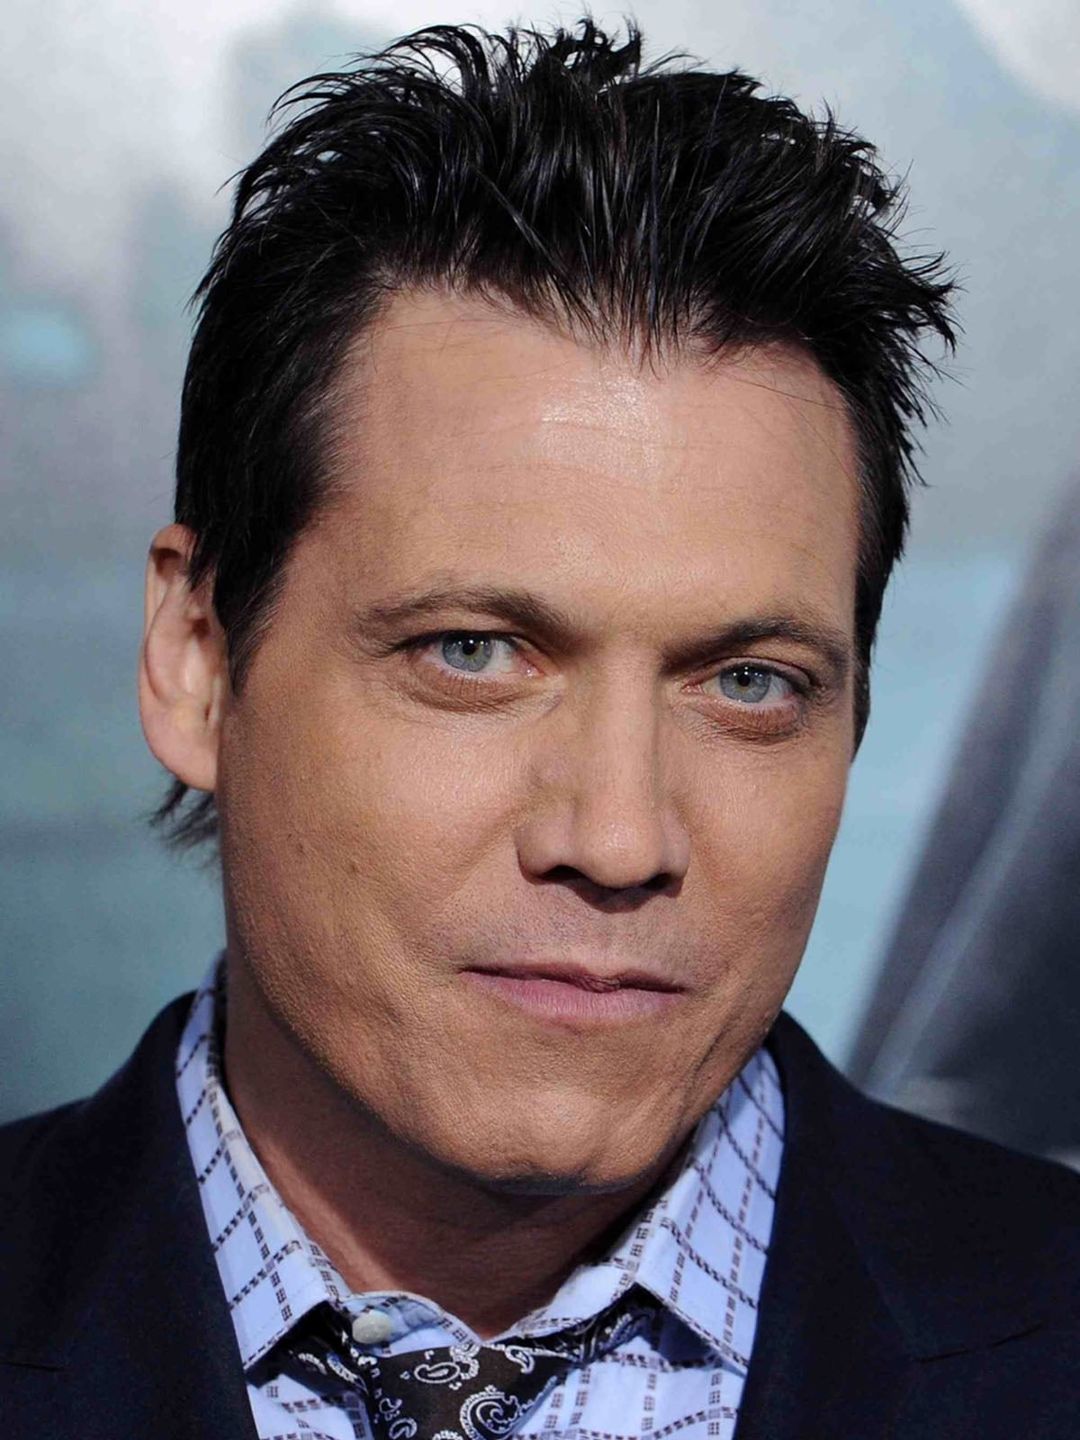 Holt McCallany who is his father